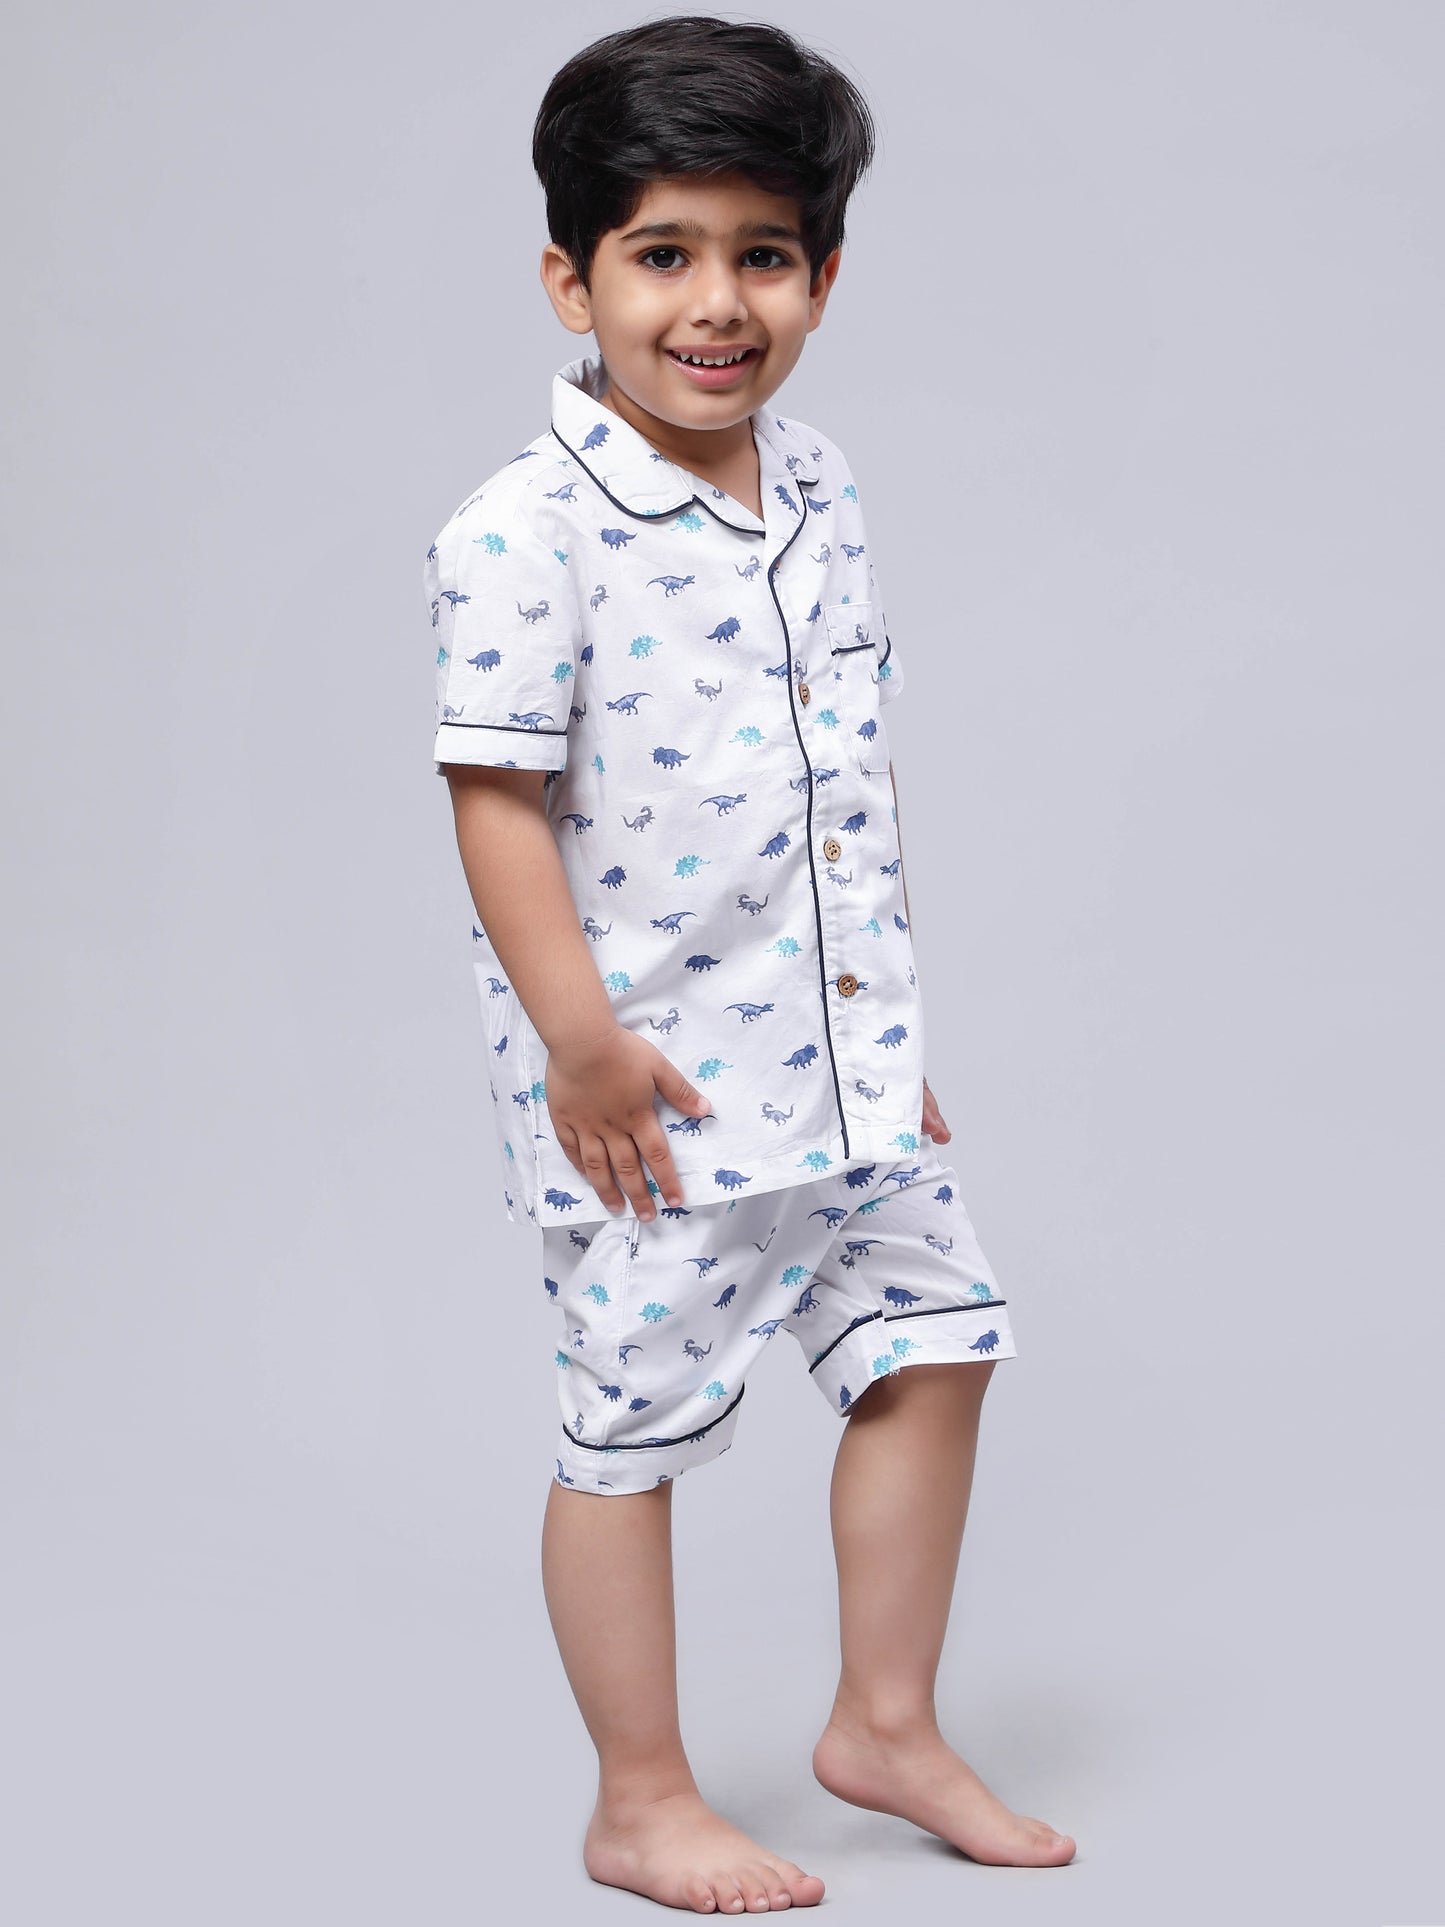 Unisex Collared Sleepsuit in Dino Print for Girls or Boys